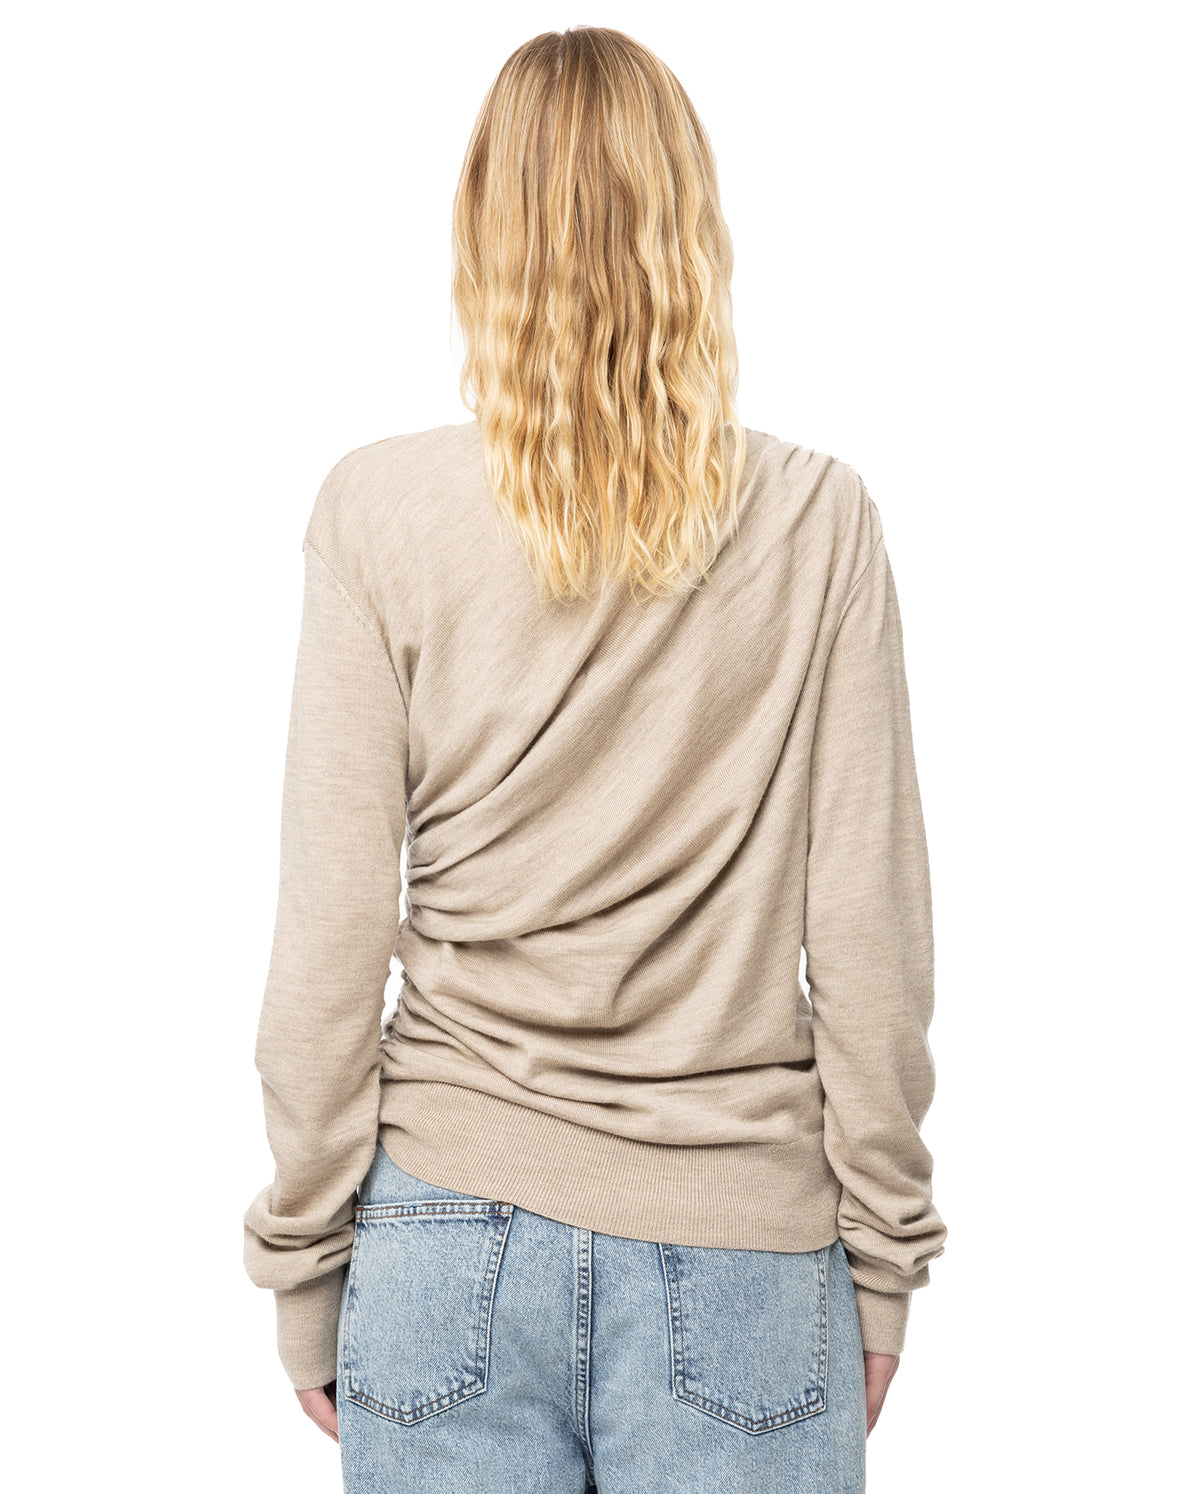 Eleornore Knitted Top  - Camel